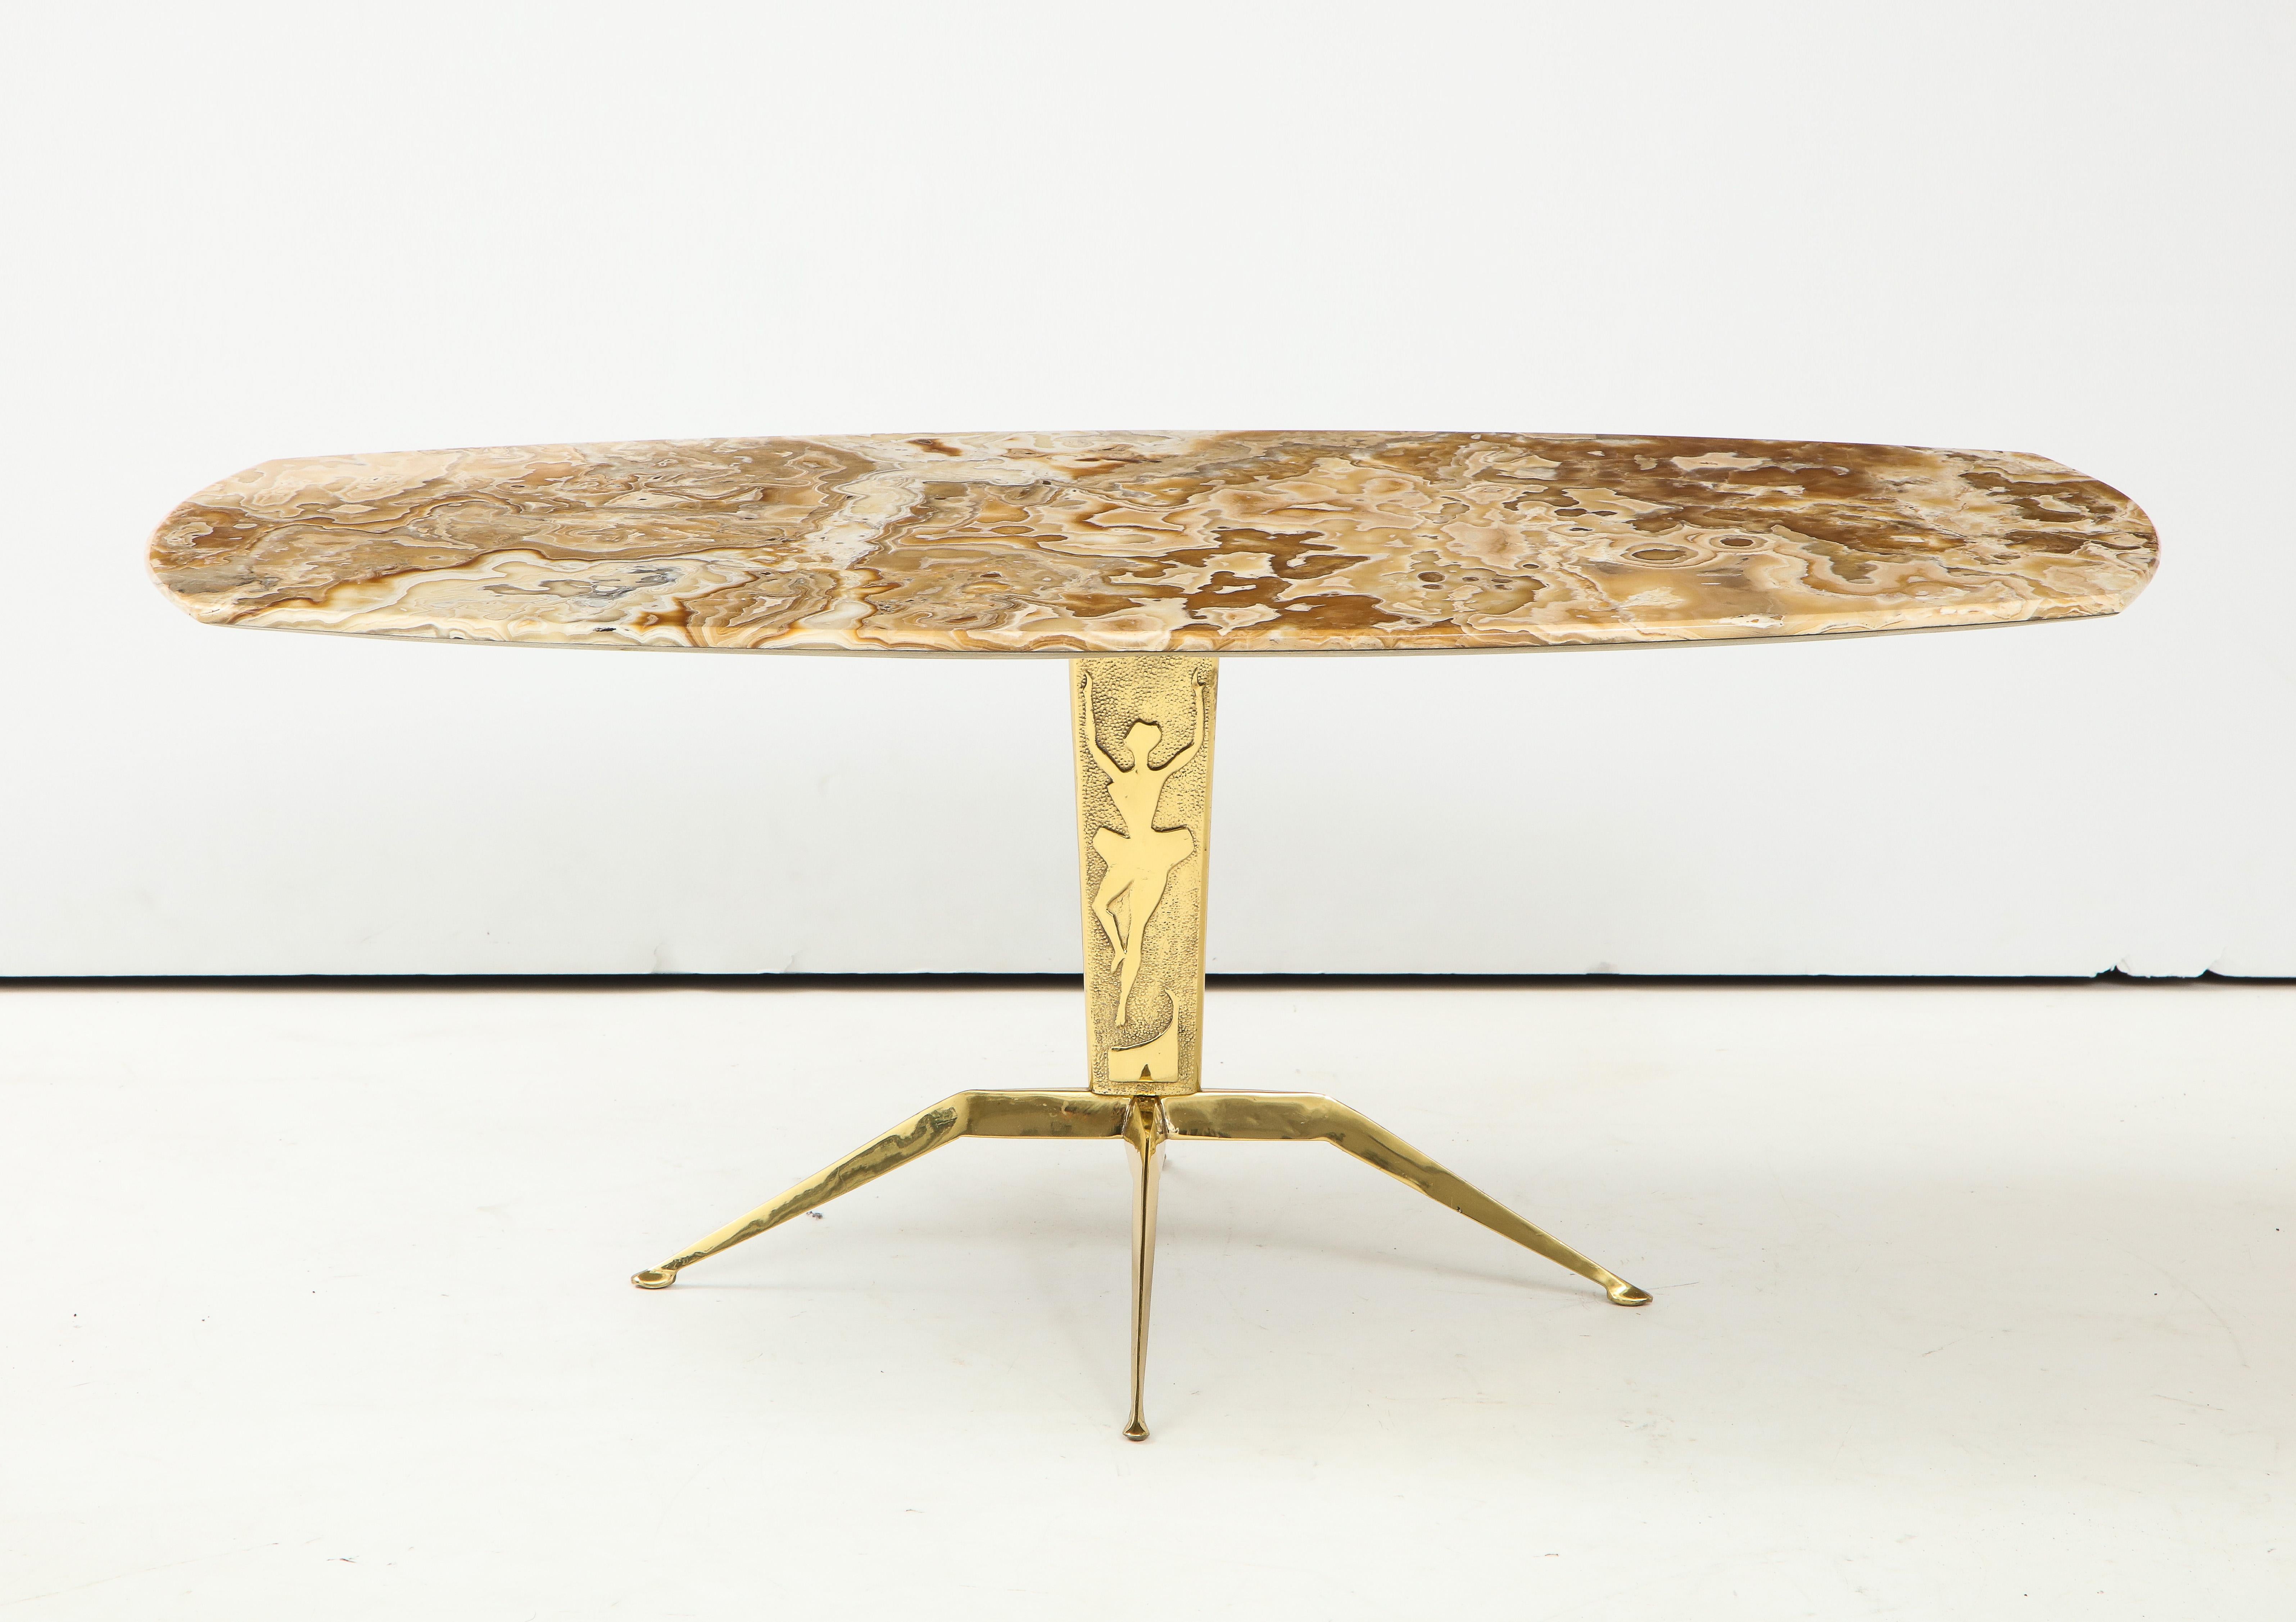 Stunning 1950s Italian spider brass base coffee table with onyx top.